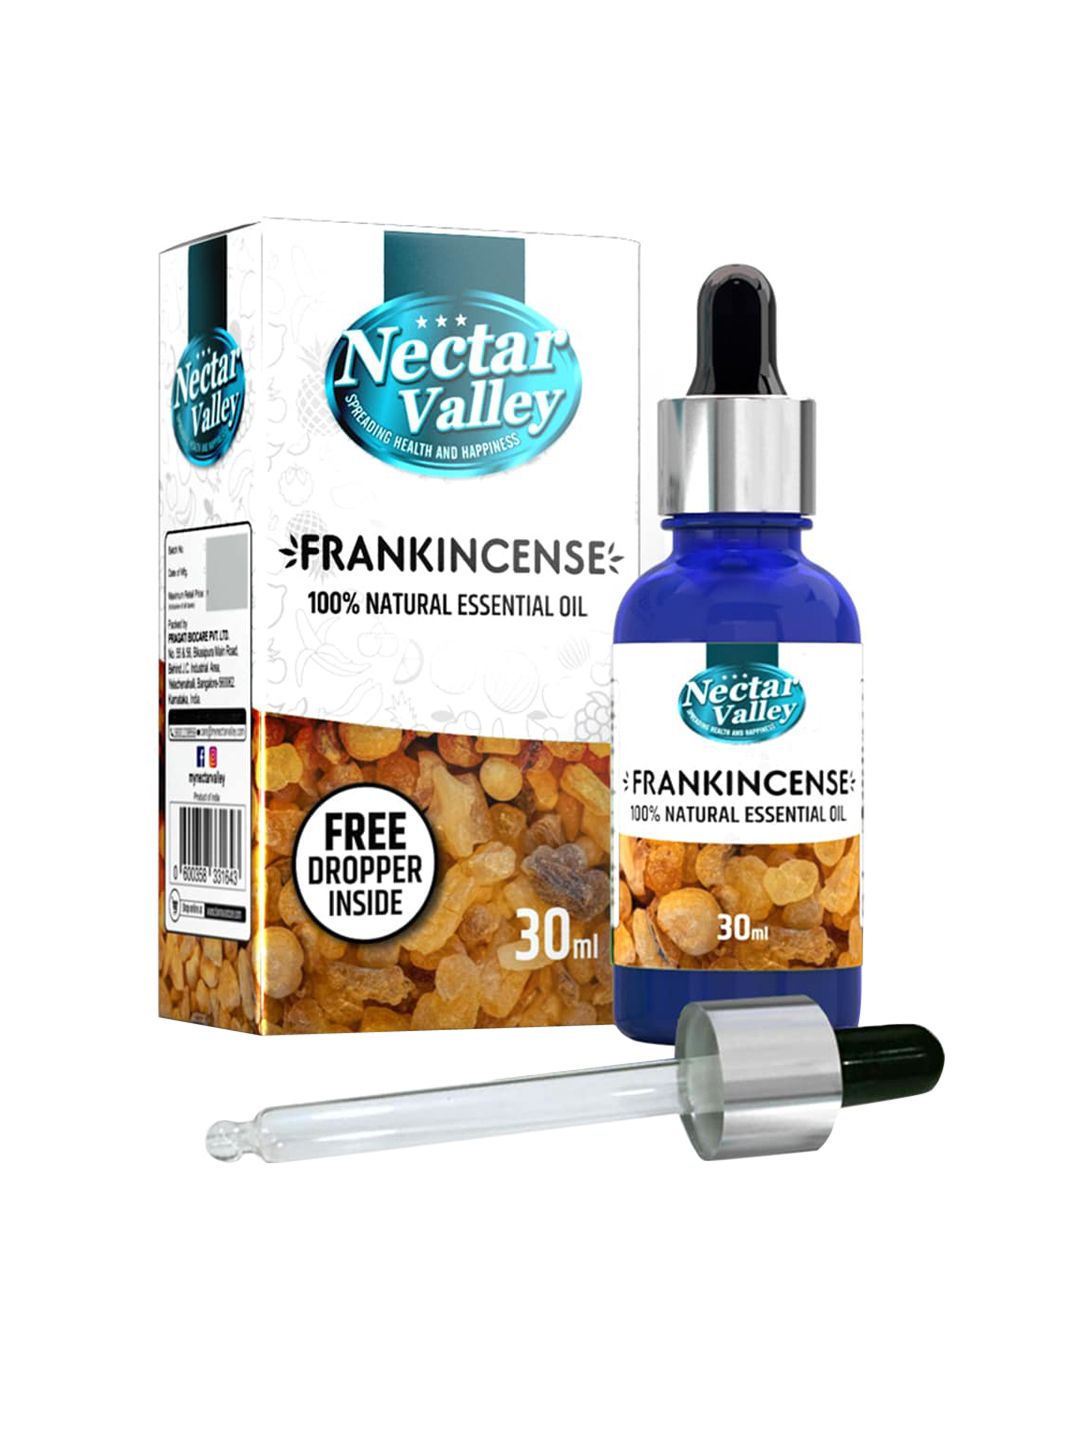 Nectar Valley Frankincense Essential Oil-Natural Aromatherapy Oil For Scent or Diffuser Price in India